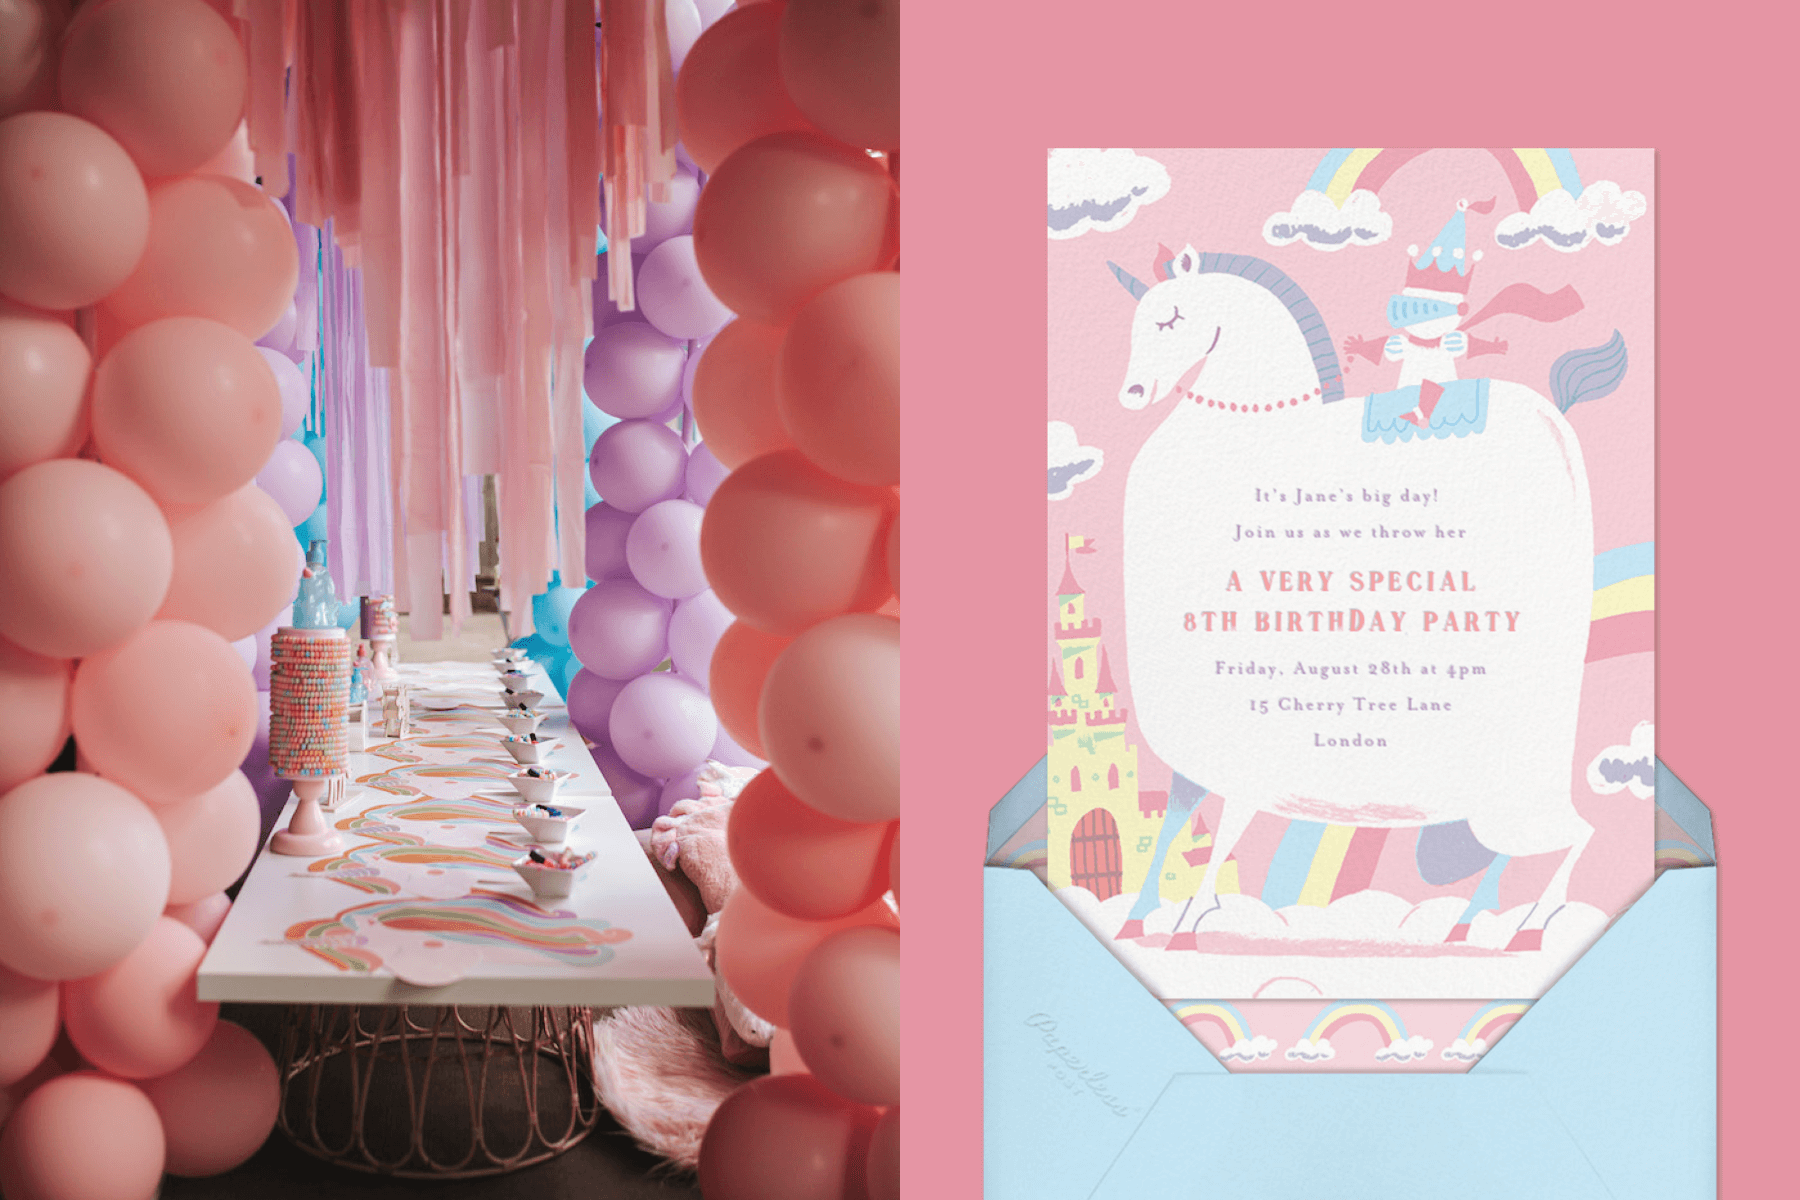 Left: Pink and purple balloon installations surround a party table. Right: A party invitation shows a knight riding a voluptuous unicorn.